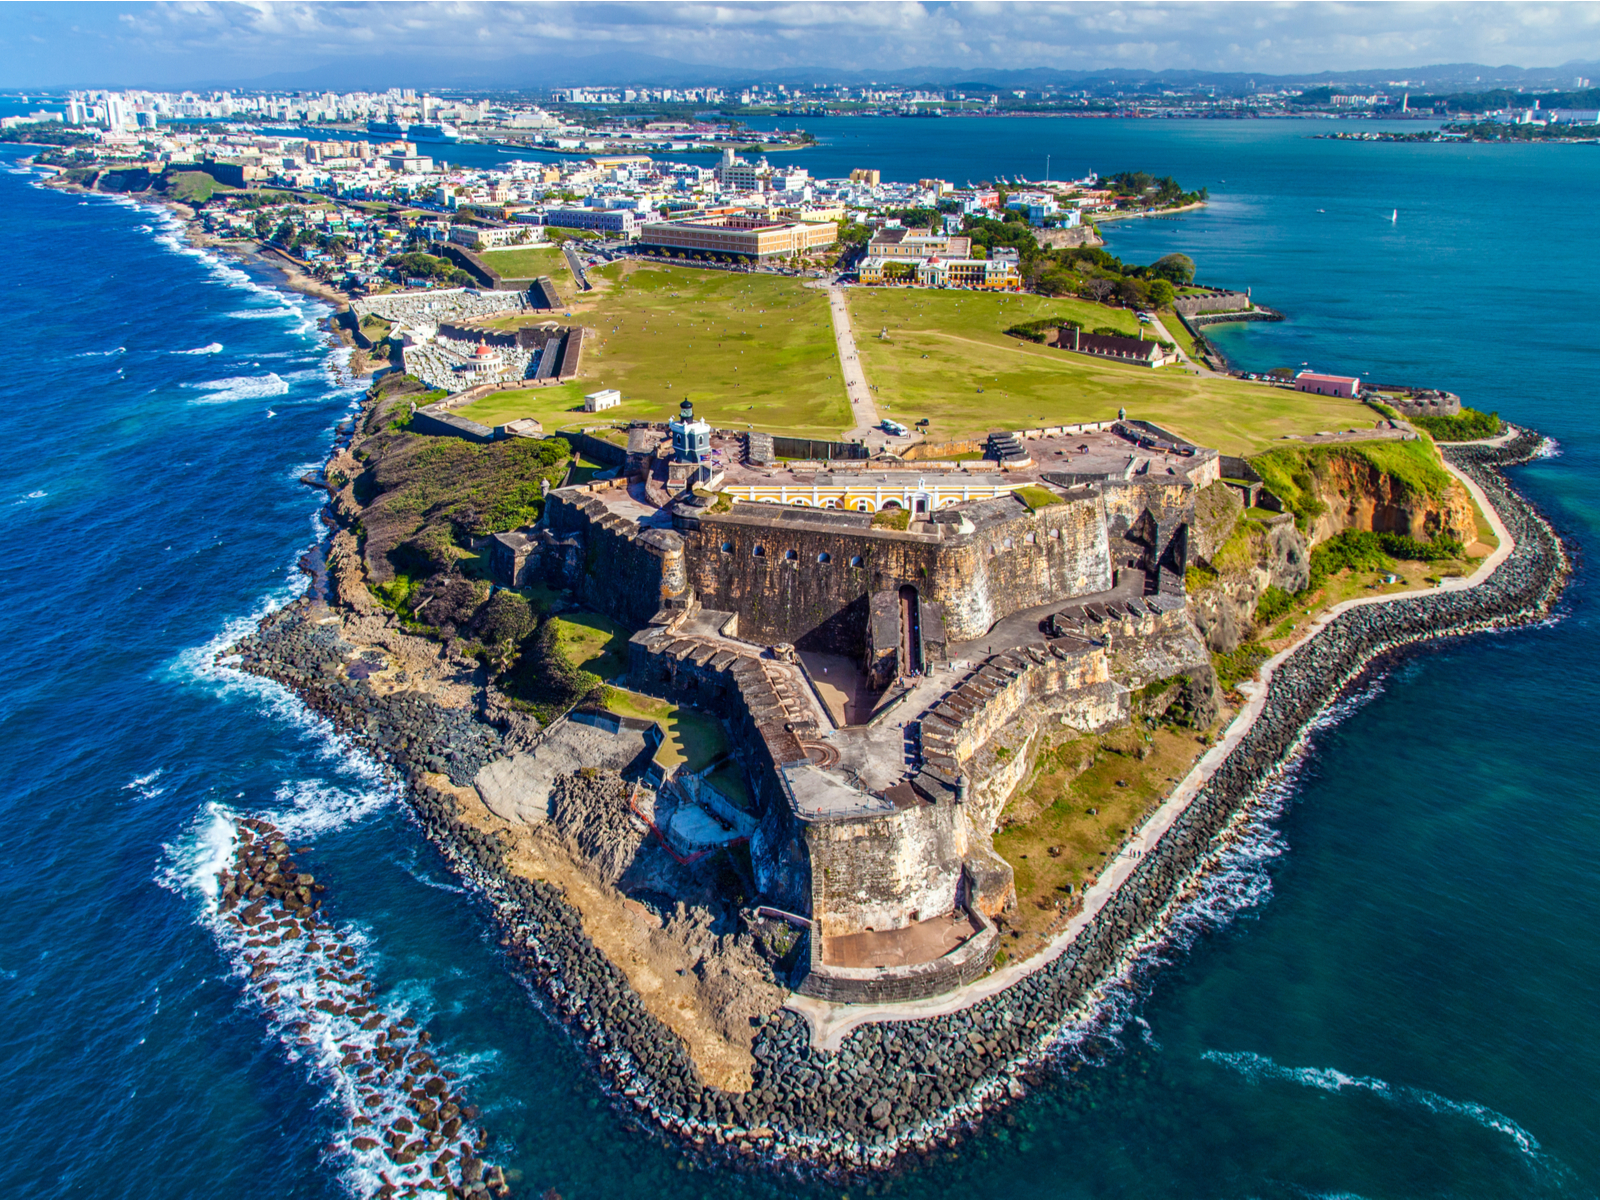 Stunning aerial photo of San Felipe del Morro with its rocky shoreline and San Juan's skyline in background, a must add item on things to do in Puerto Rico